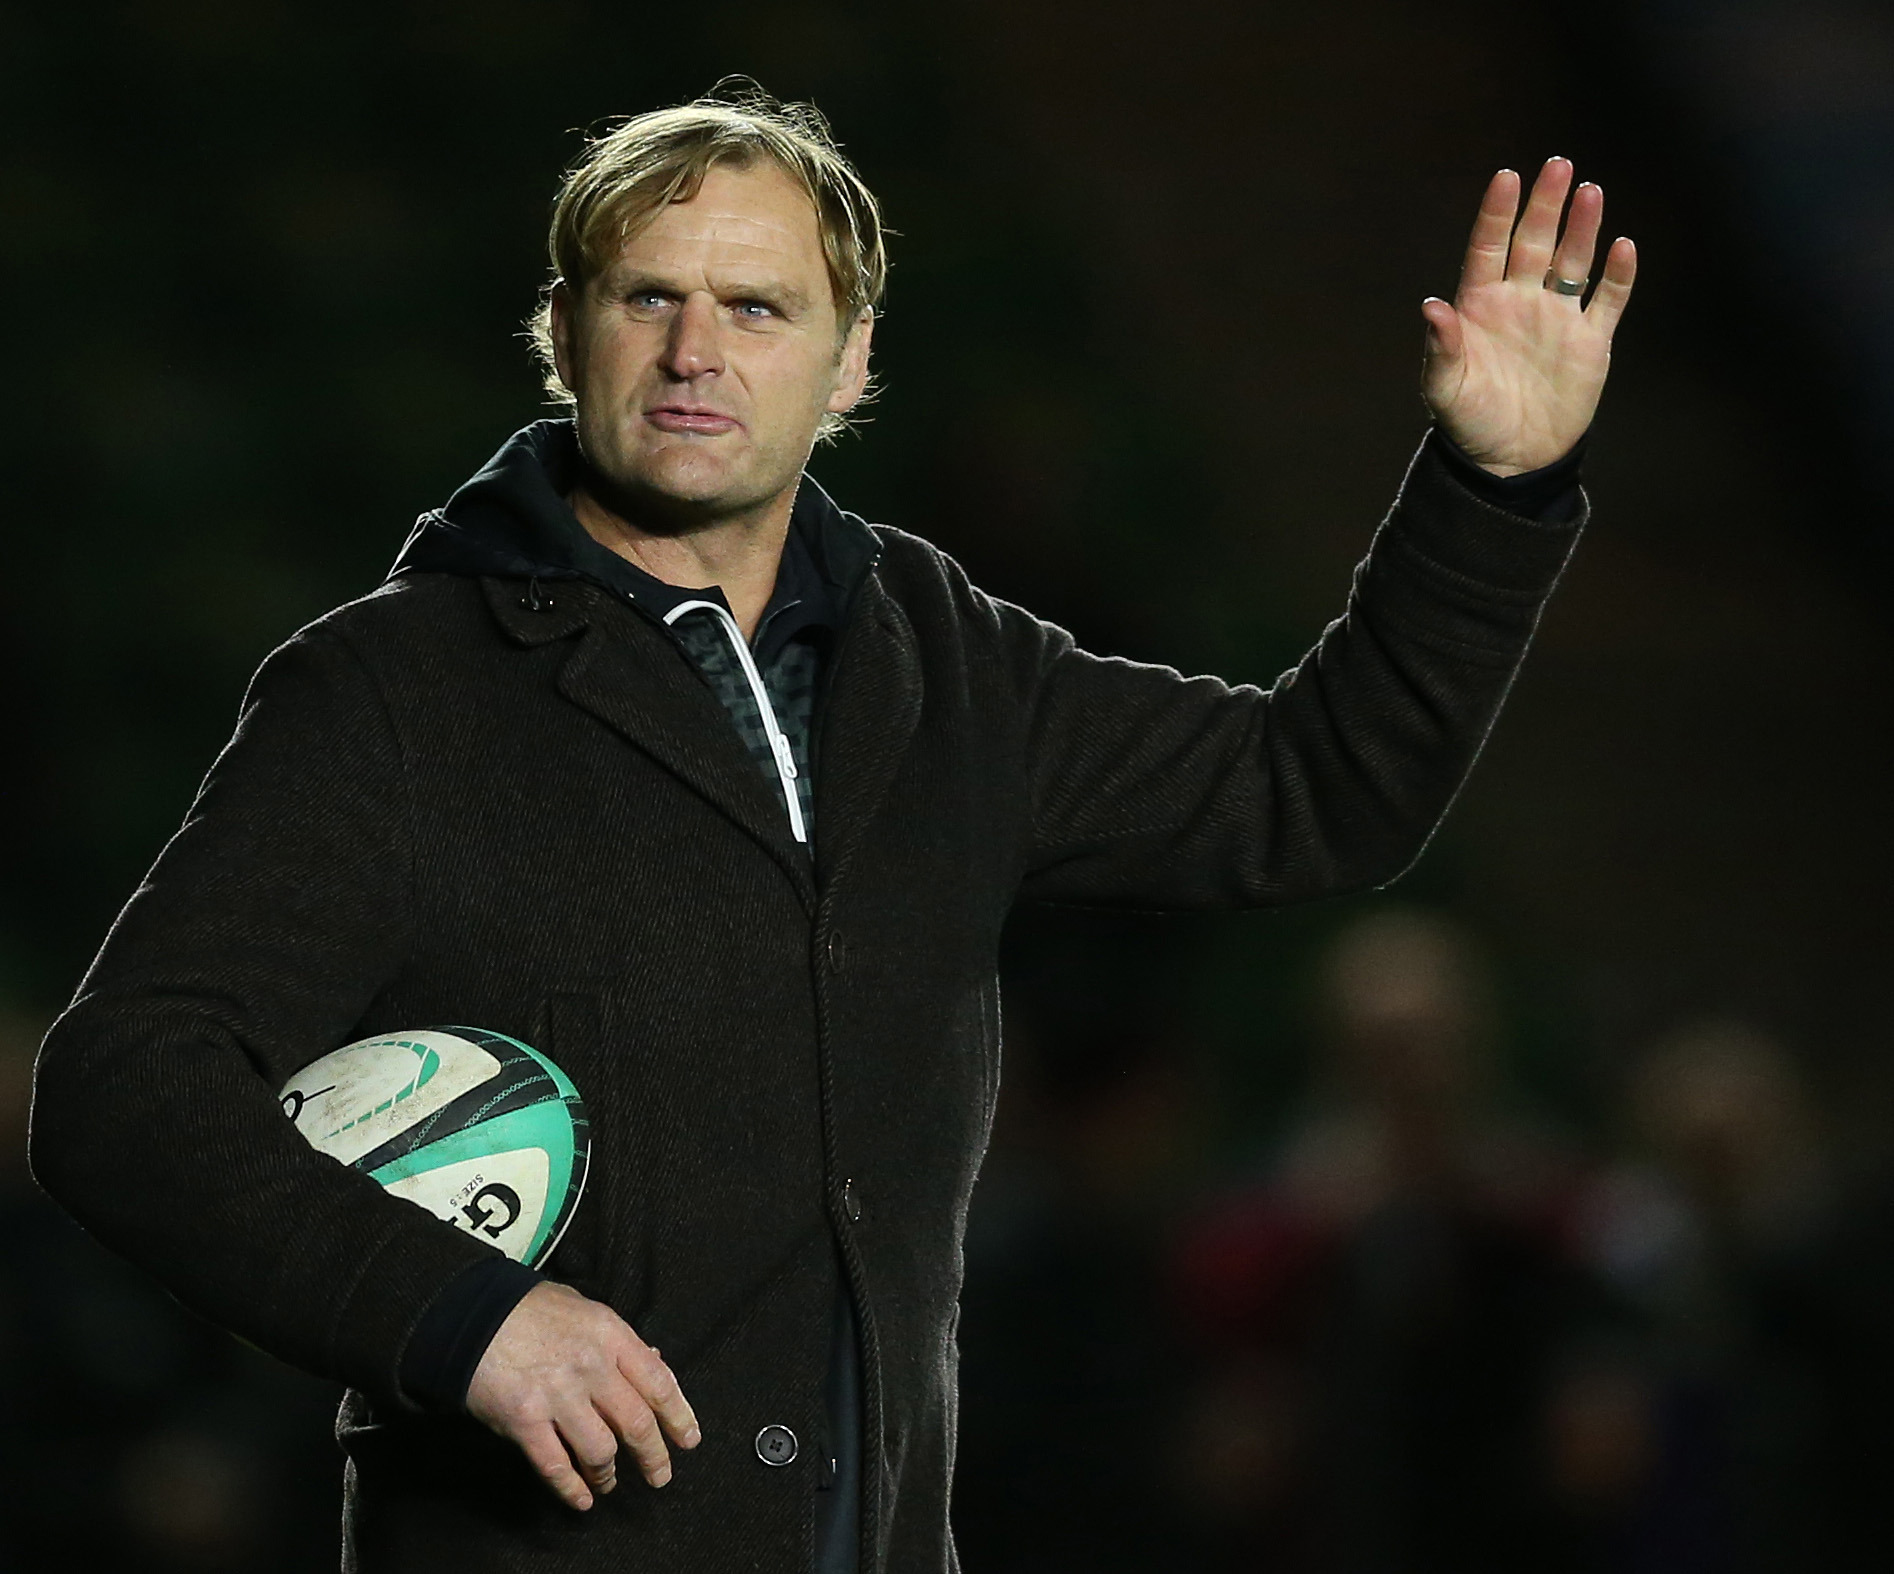 'Next two weeks is big': All Blacks coach facing axe